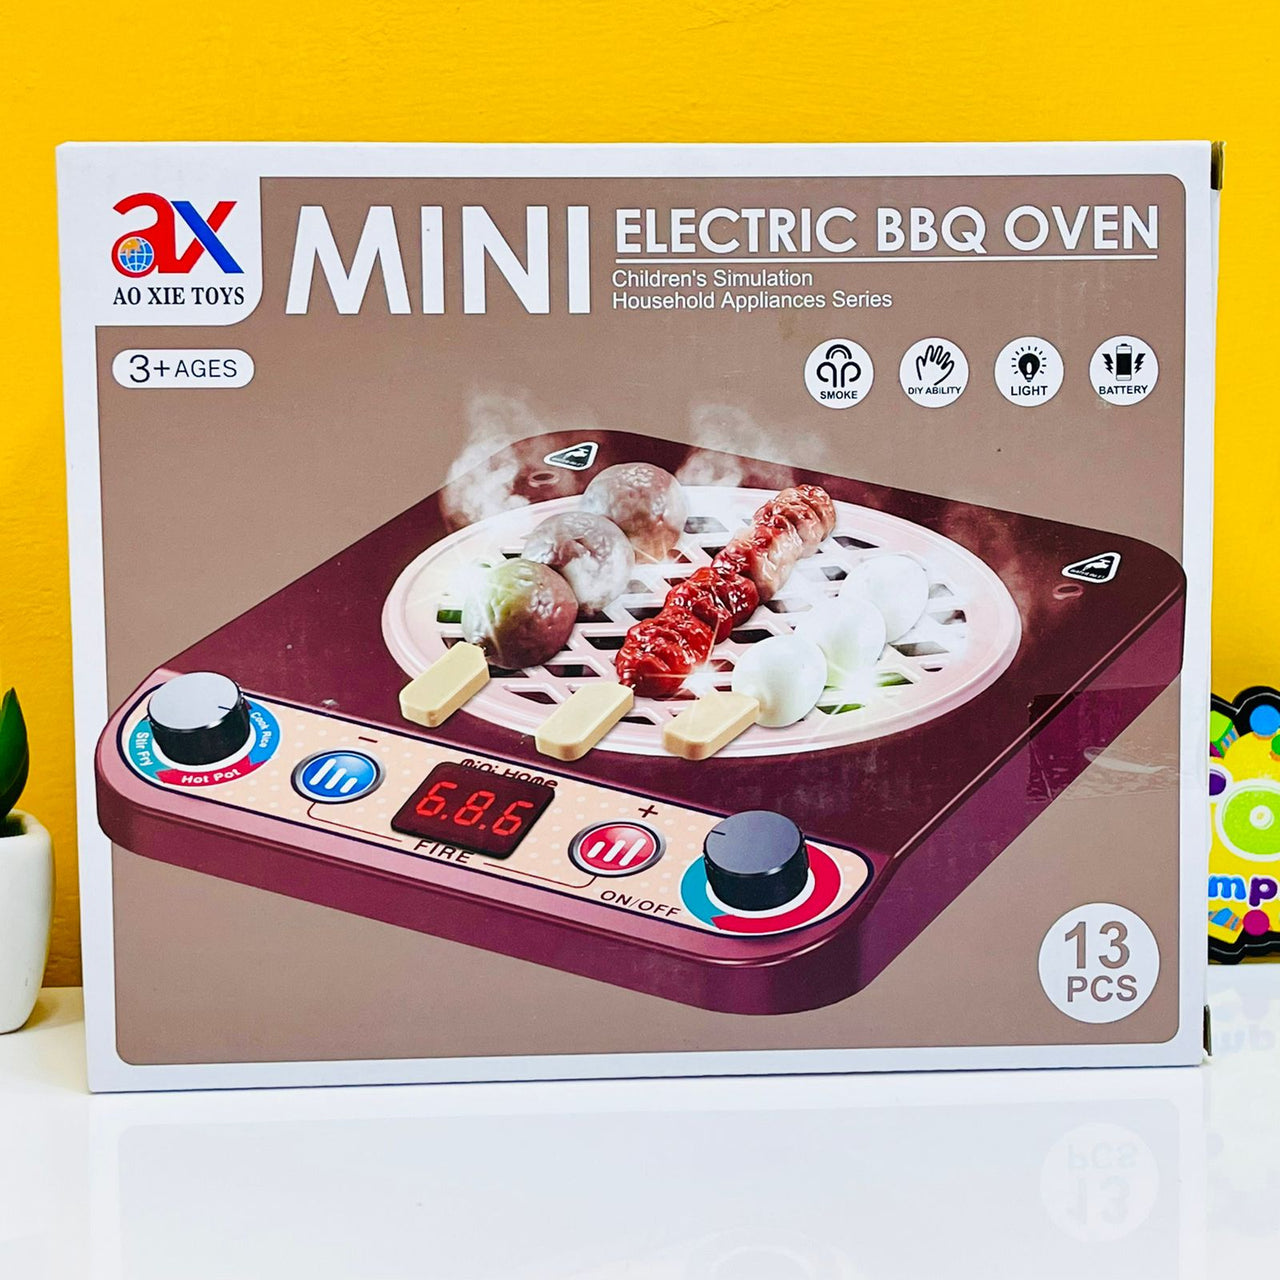 Mini Electric BBQ Oven with Simulation Smoke